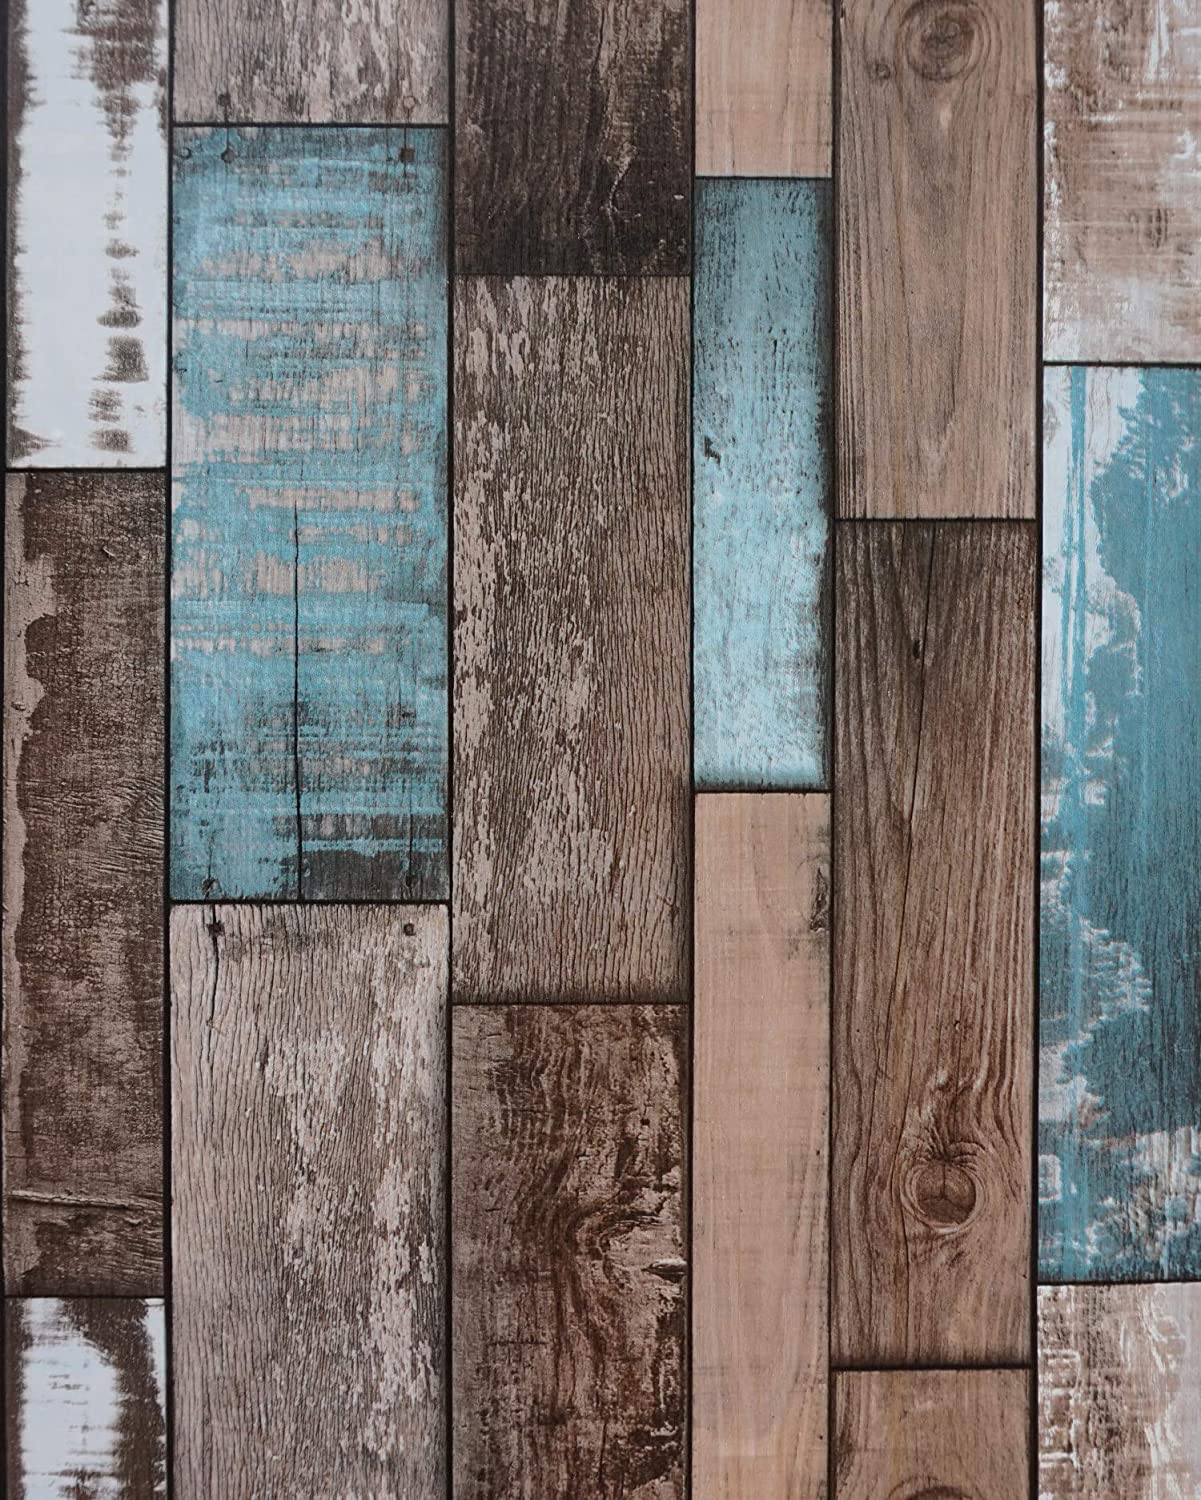 16.4Ft Wood Plank Wallpaper Wood Wallpaper Stick and Peel Wood Paper Self Adhesive Wallpaper Removable Wallpaper Wood Look Wallpaper Rustic Vintage Reclaimed Distressed Wood Wallpaper Roll Faux 3D